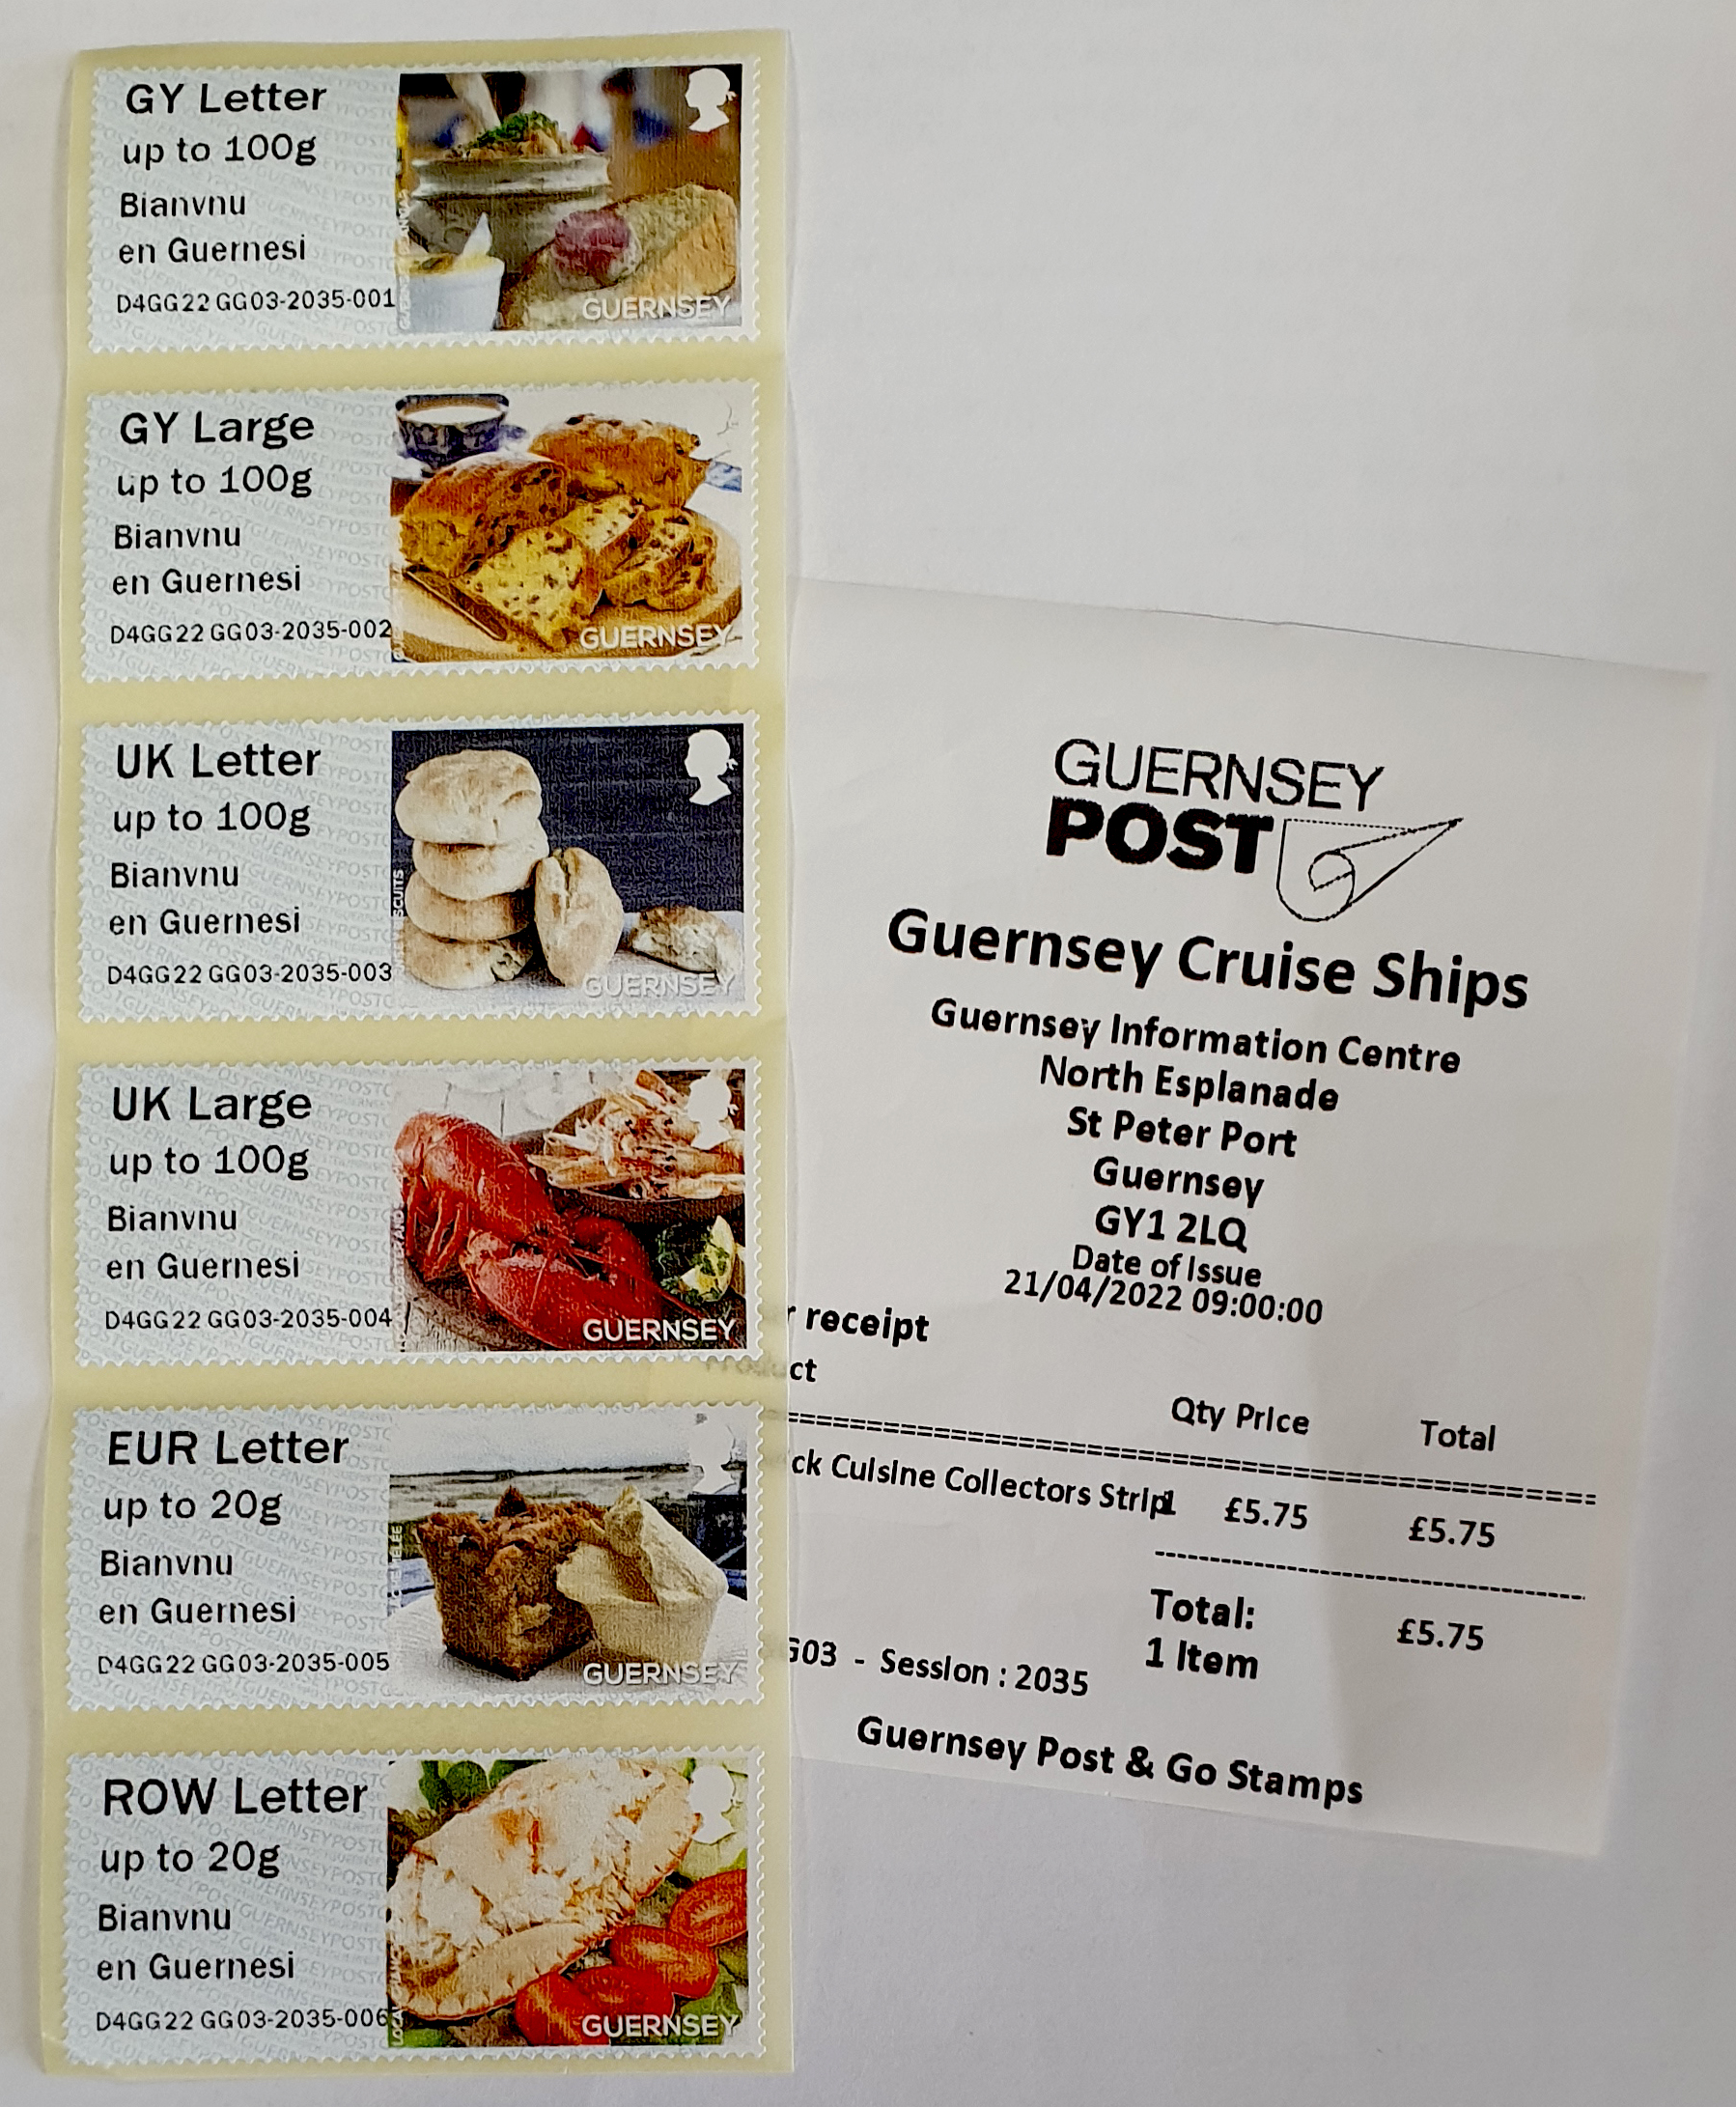 Guernsey to vend Post and Go stamps at Guernsey’s Tourist Information Centre